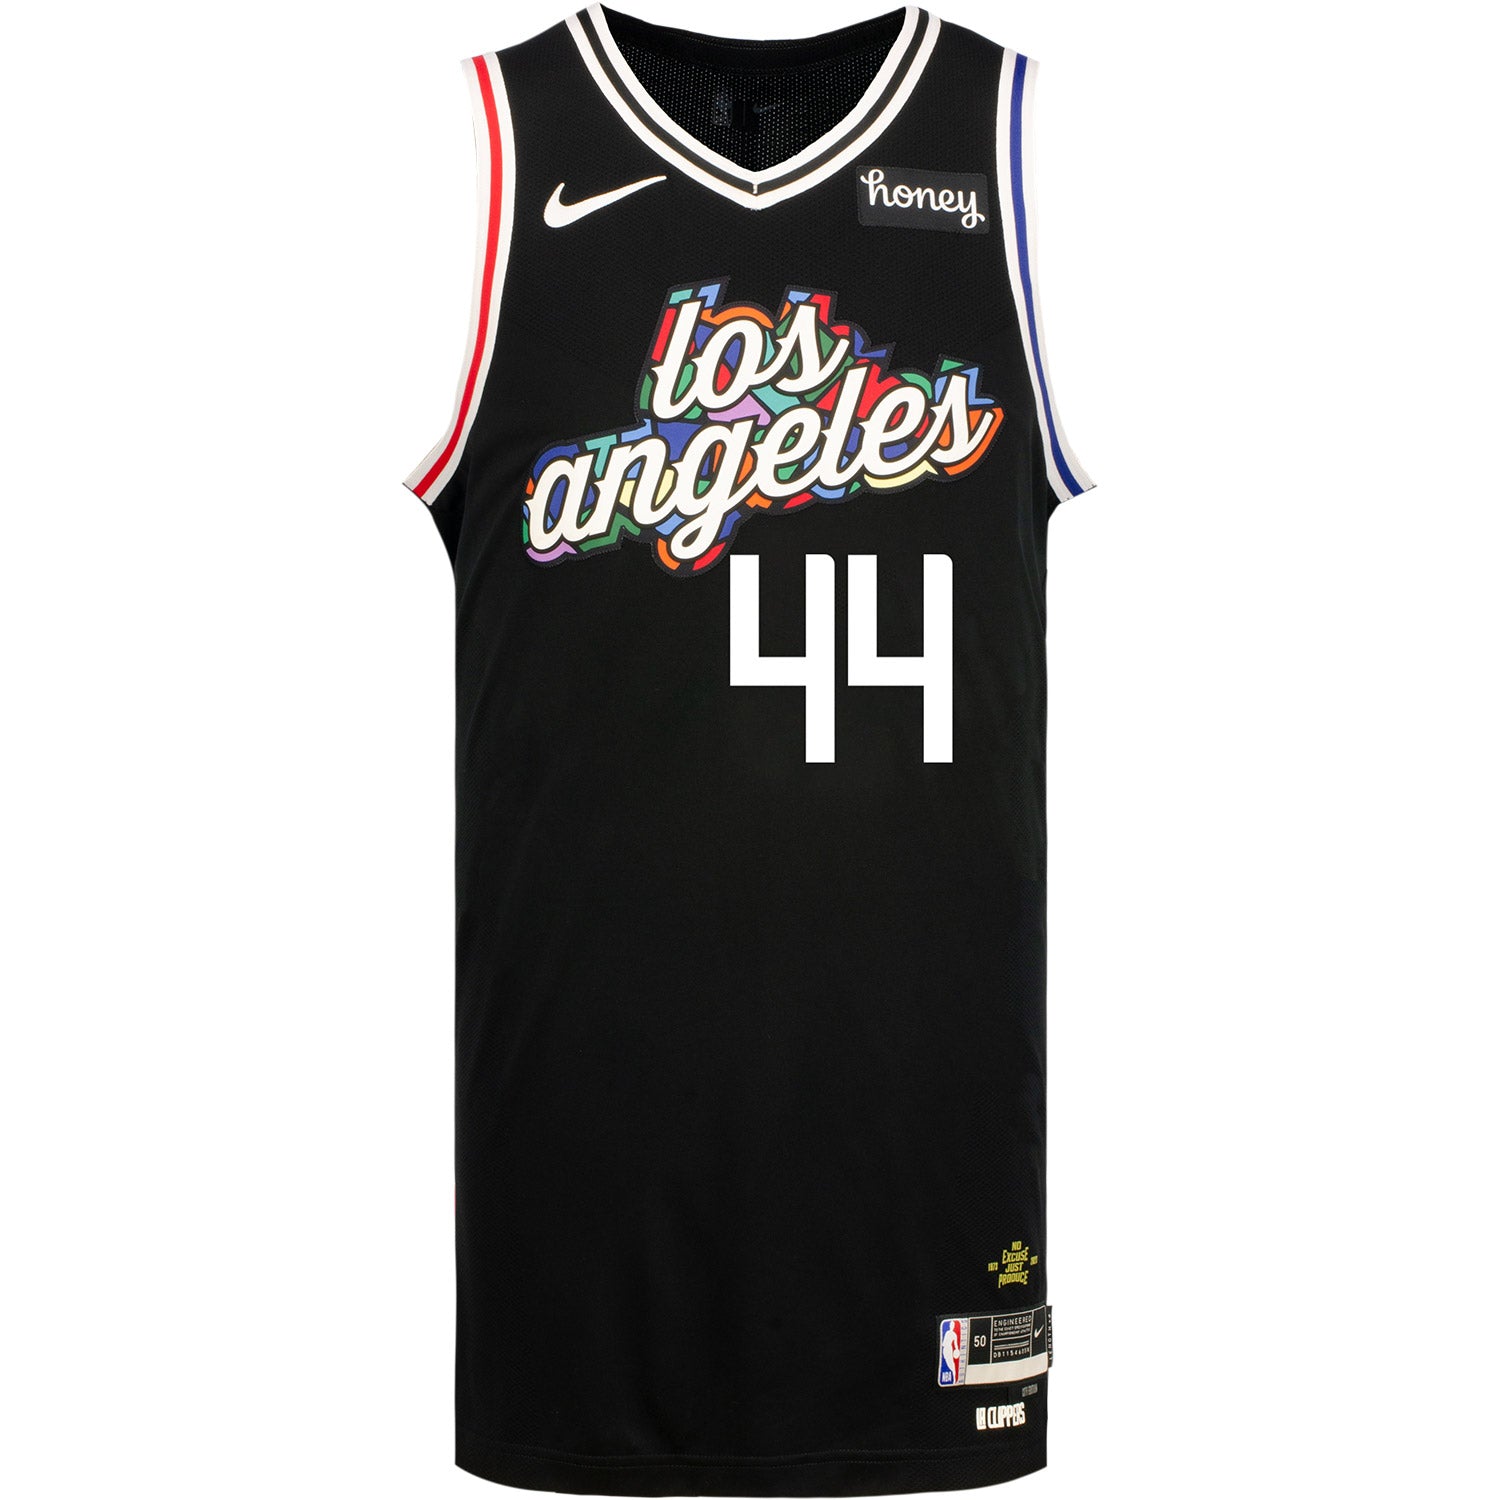 Official San Antonio Spurs Authentic Jerseys, Official Nike Jersey